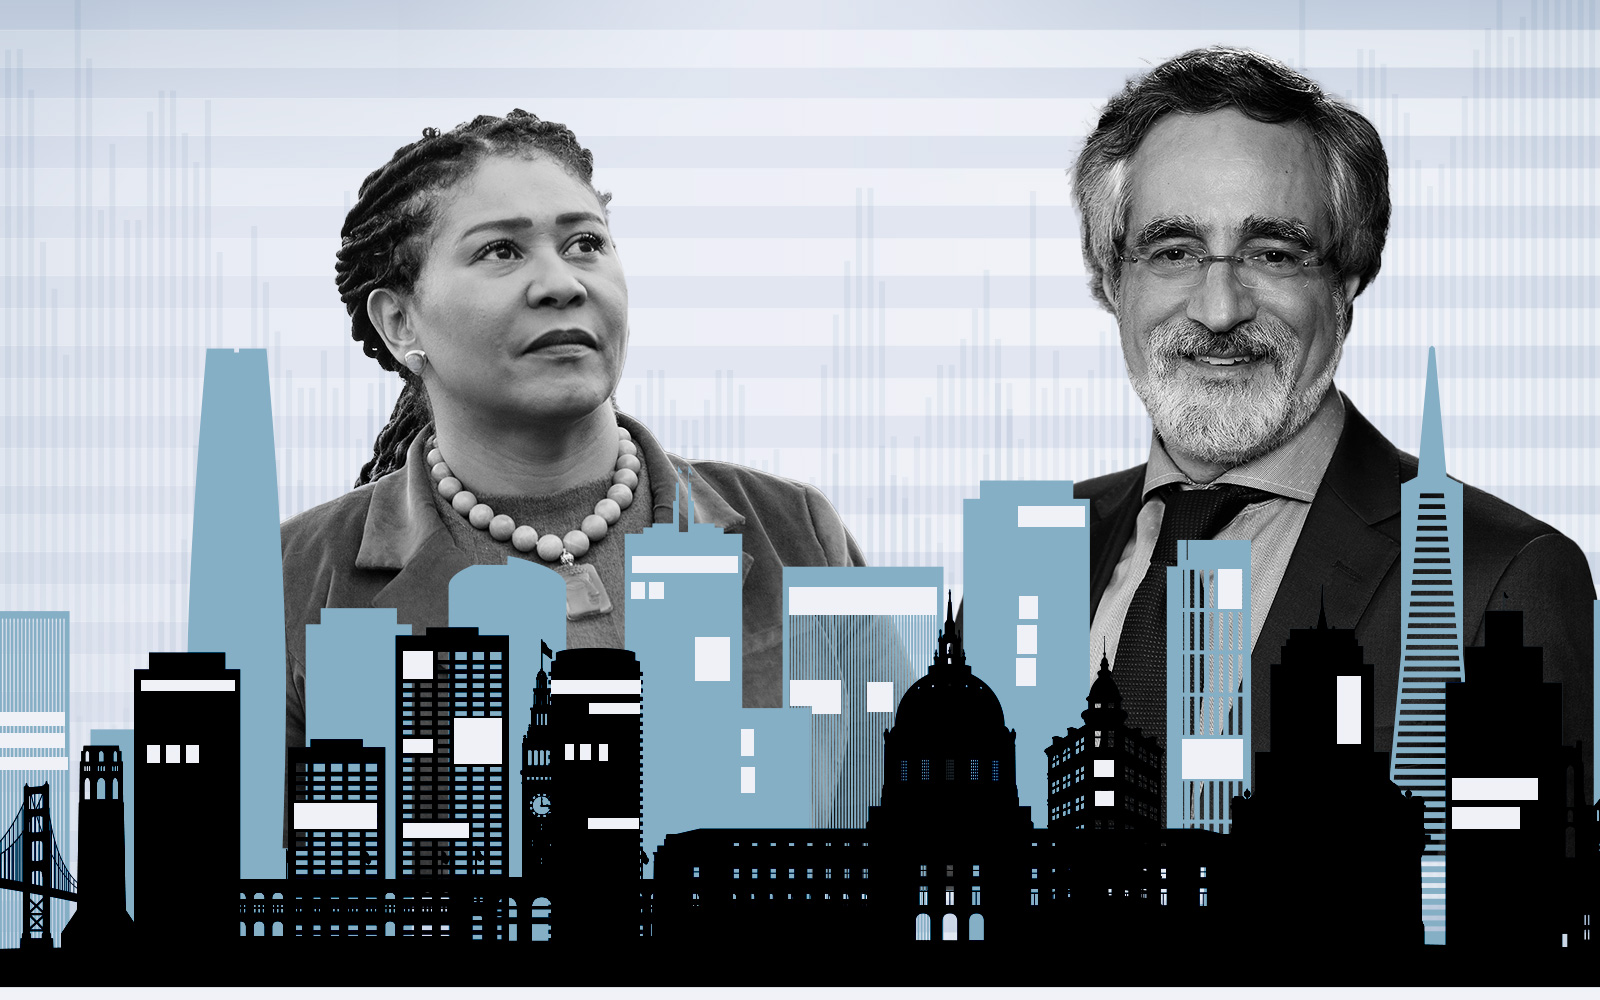 SF’s Breed and Peskin launch plan to ease office-housing conversions